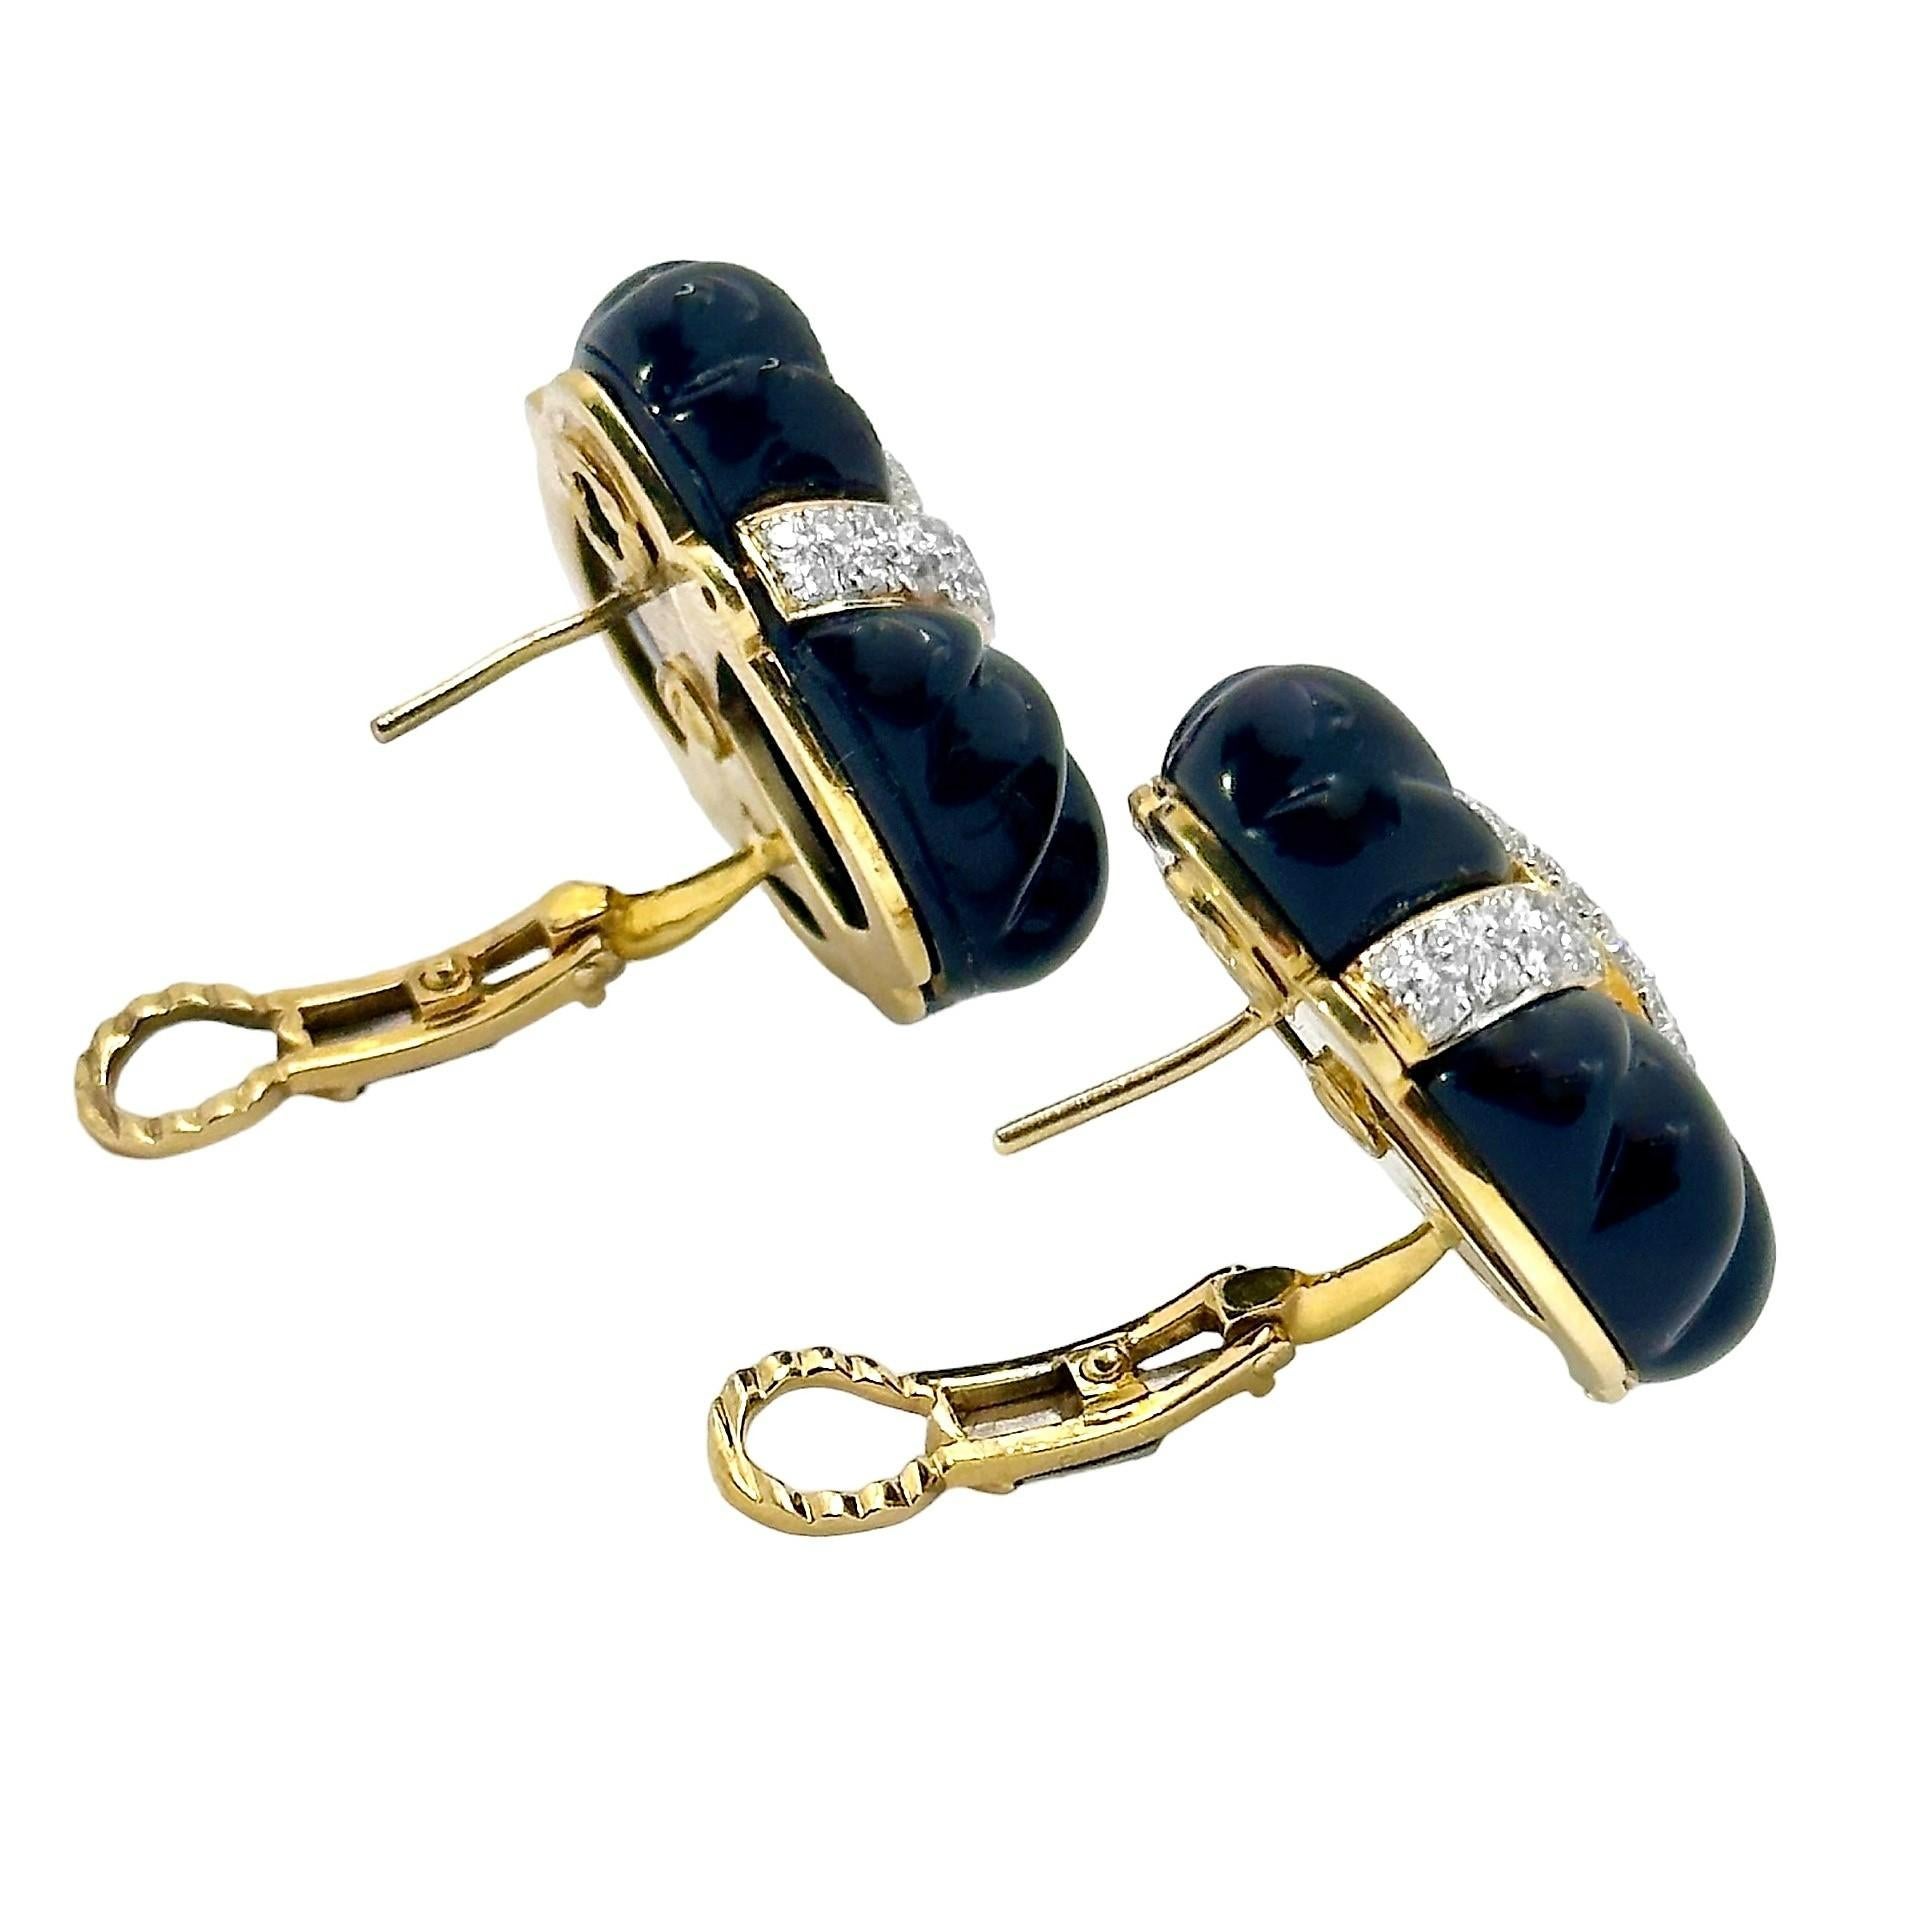 Exquisitely Designed Gold, Diamond and Fluted Onyx Fashion Earrings 1.25 Inches In Good Condition In Palm Beach, FL